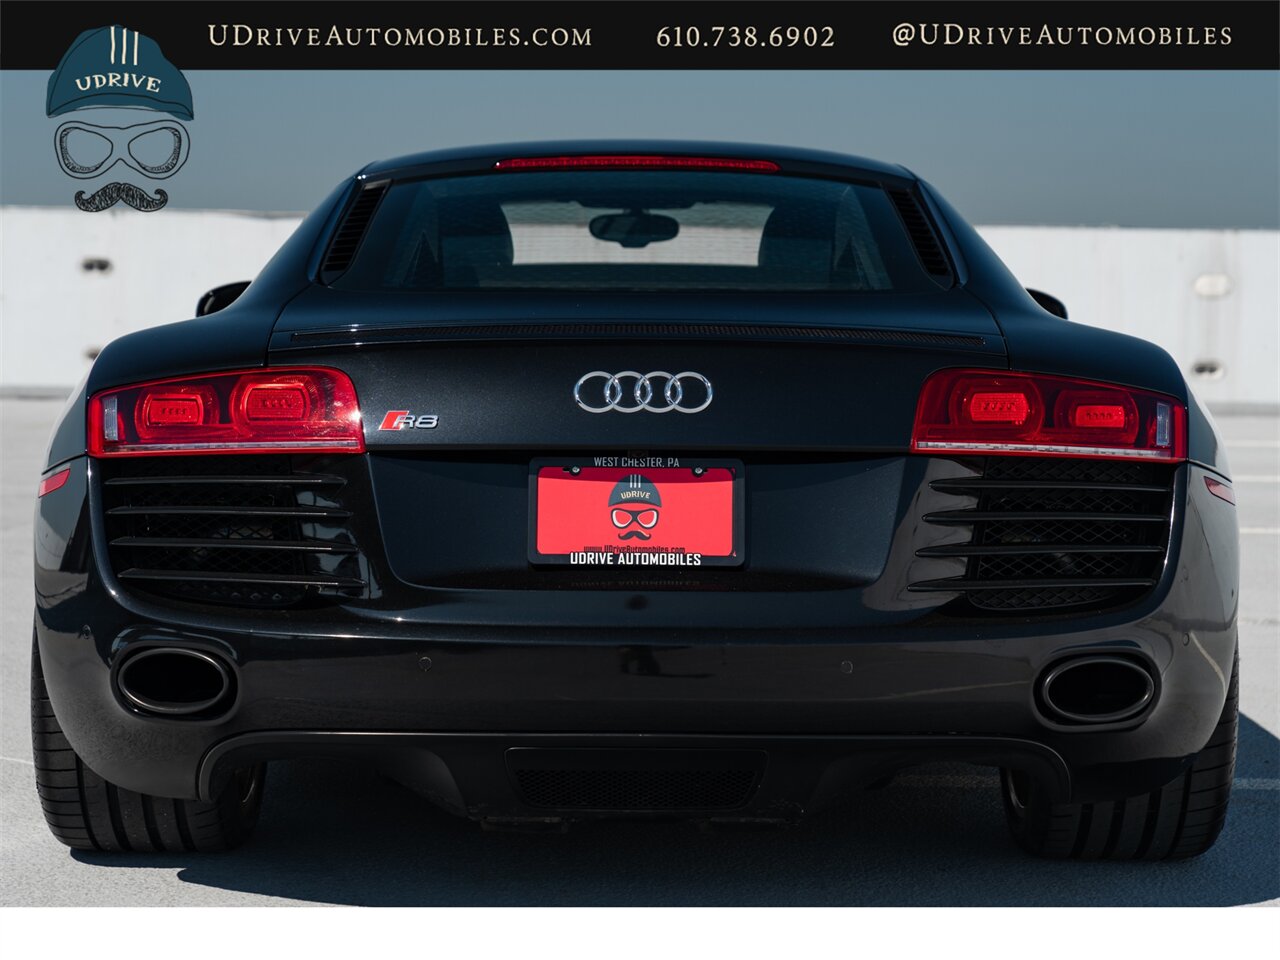 2009 Audi R8 Quattro  4.2L V8 6 Speed Manual - Photo 21 - West Chester, PA 19382